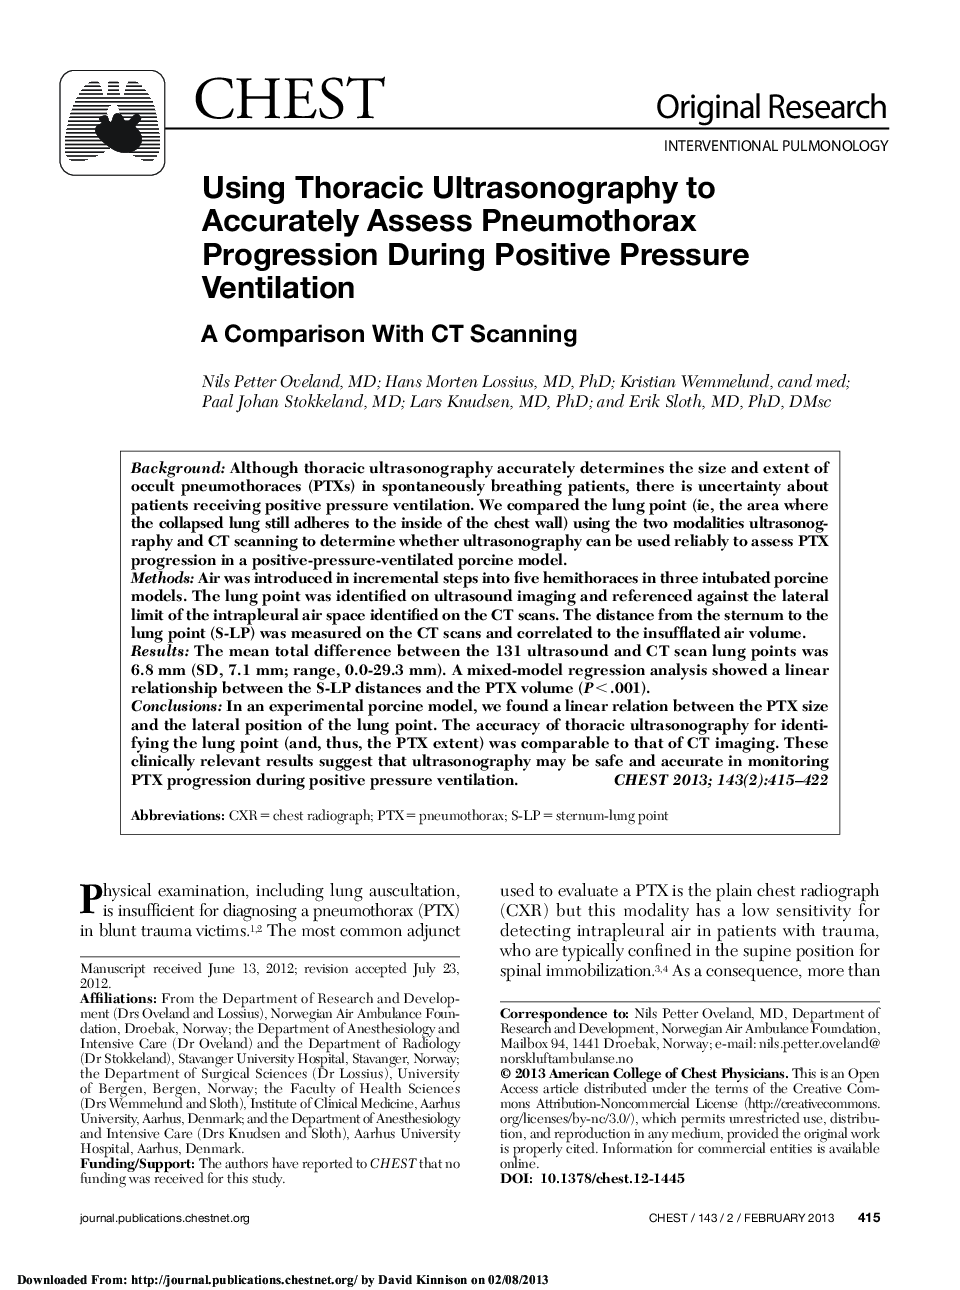 Using Thoracic Ultrasonography to Accurately Assess Pneumothorax Progression During Positive Pressure Ventilation: A Comparison With CT Scanning